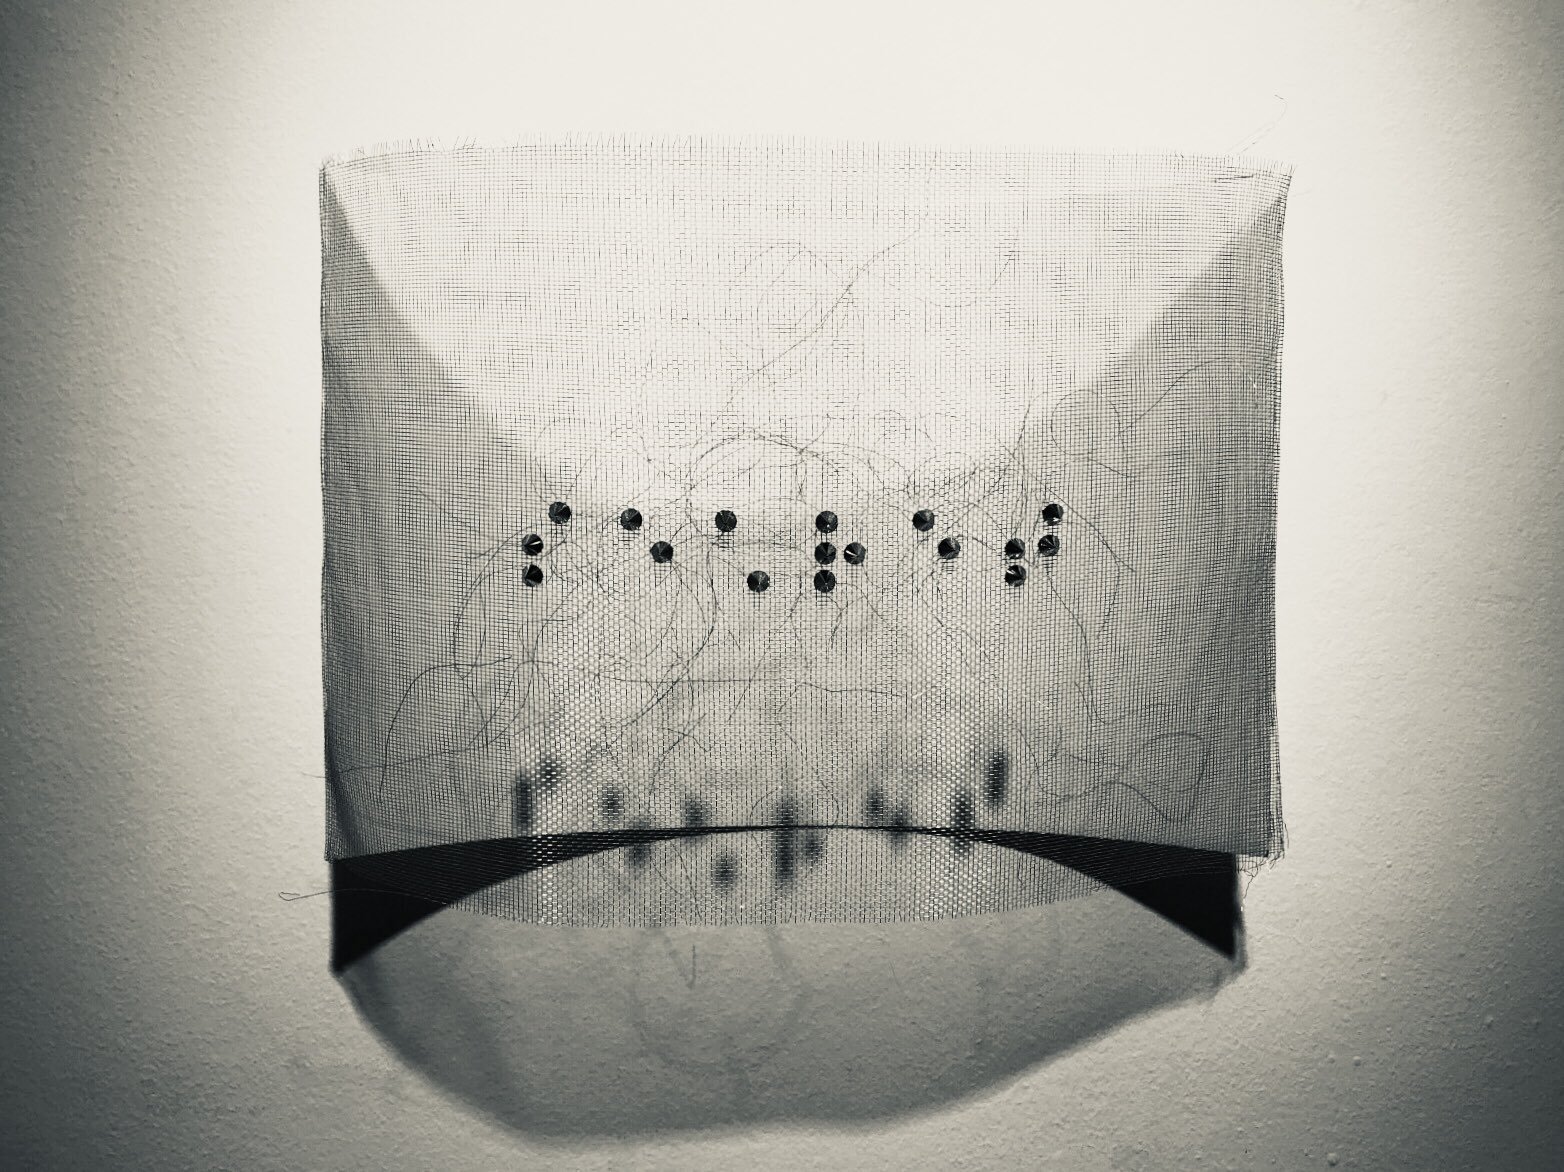 Özgül Kahraman presents variations on the Braille alphabet in her series “On Three Possibilities." (Photo courtesy of Daire Sanat)